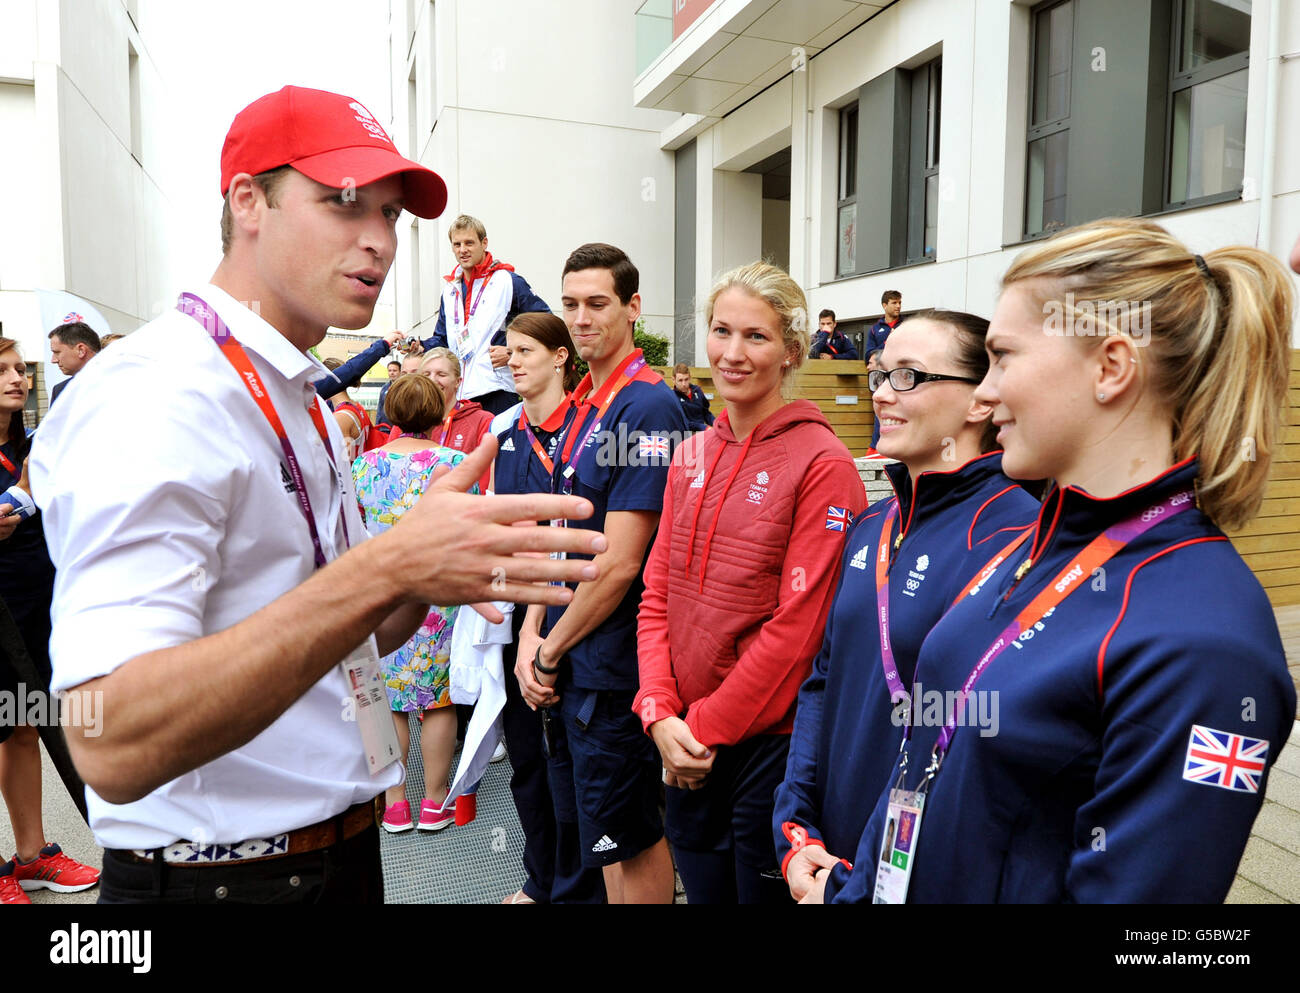 The Duke of Cambridge talks with Great Britain cyclist Victoria Pendleton (second right) during a visit to the Team GB accommodation flats in the Athletes Village at the Olympic Park in Stratford, east London. Stock Photo